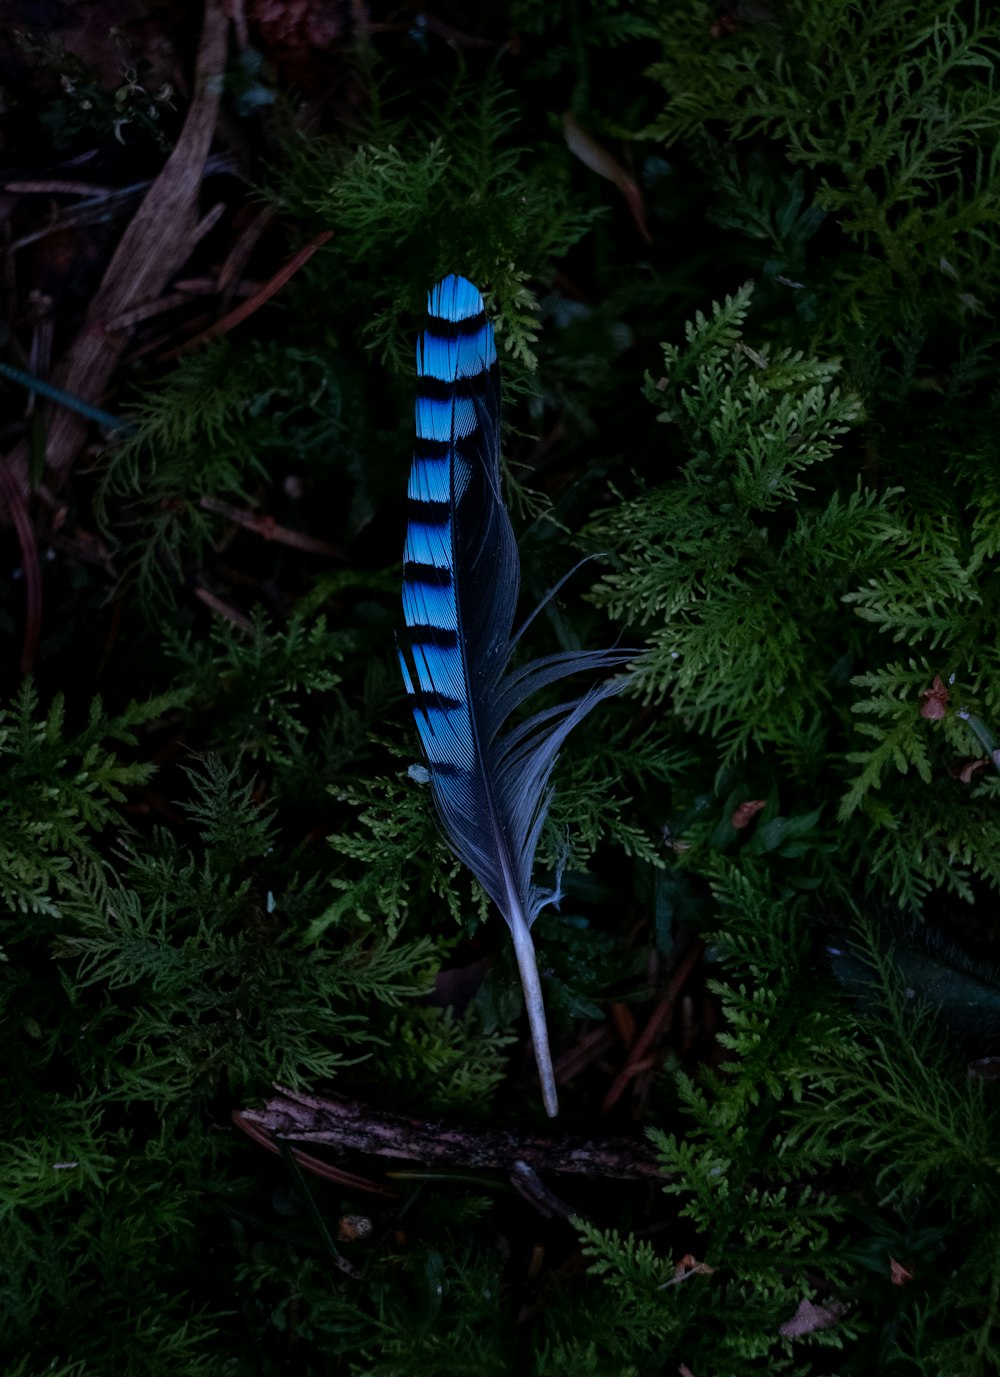 a blue bird's feather resting on a tree branch